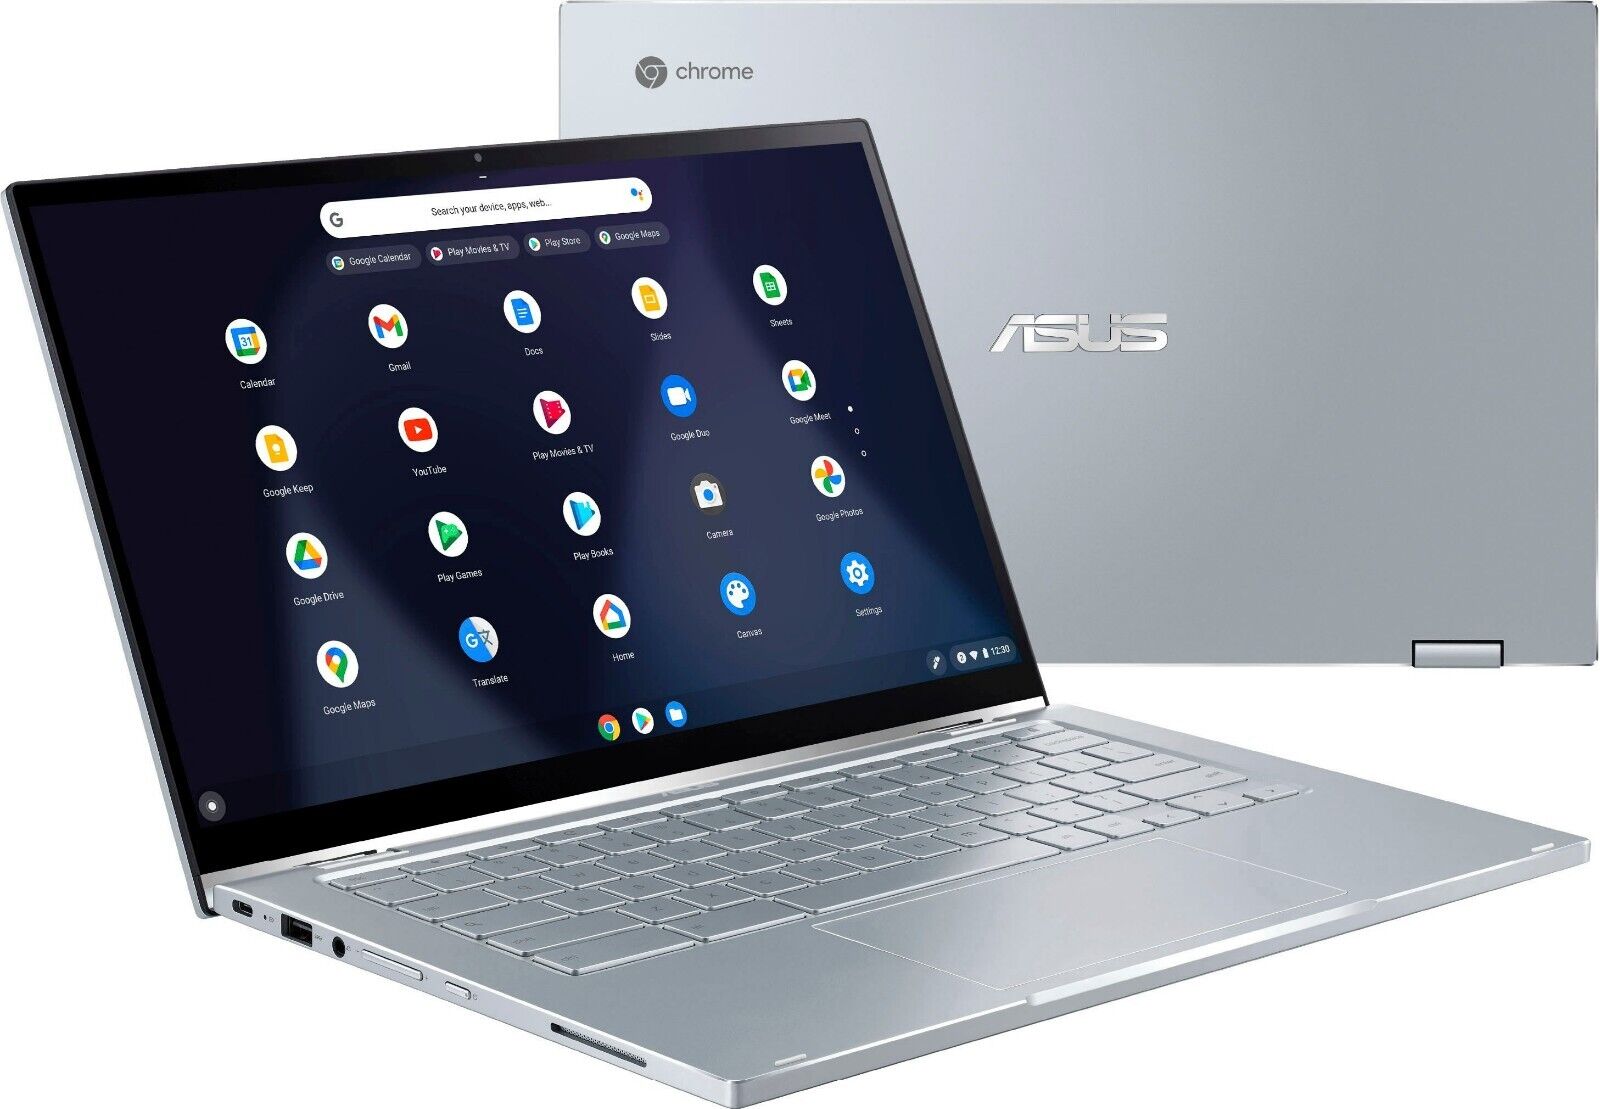 ASUS 2-in-1 14 Touchscreen Chromebook C433T - Intel Core M3-8100Y - 8GB Memory. Available Now for 249.00